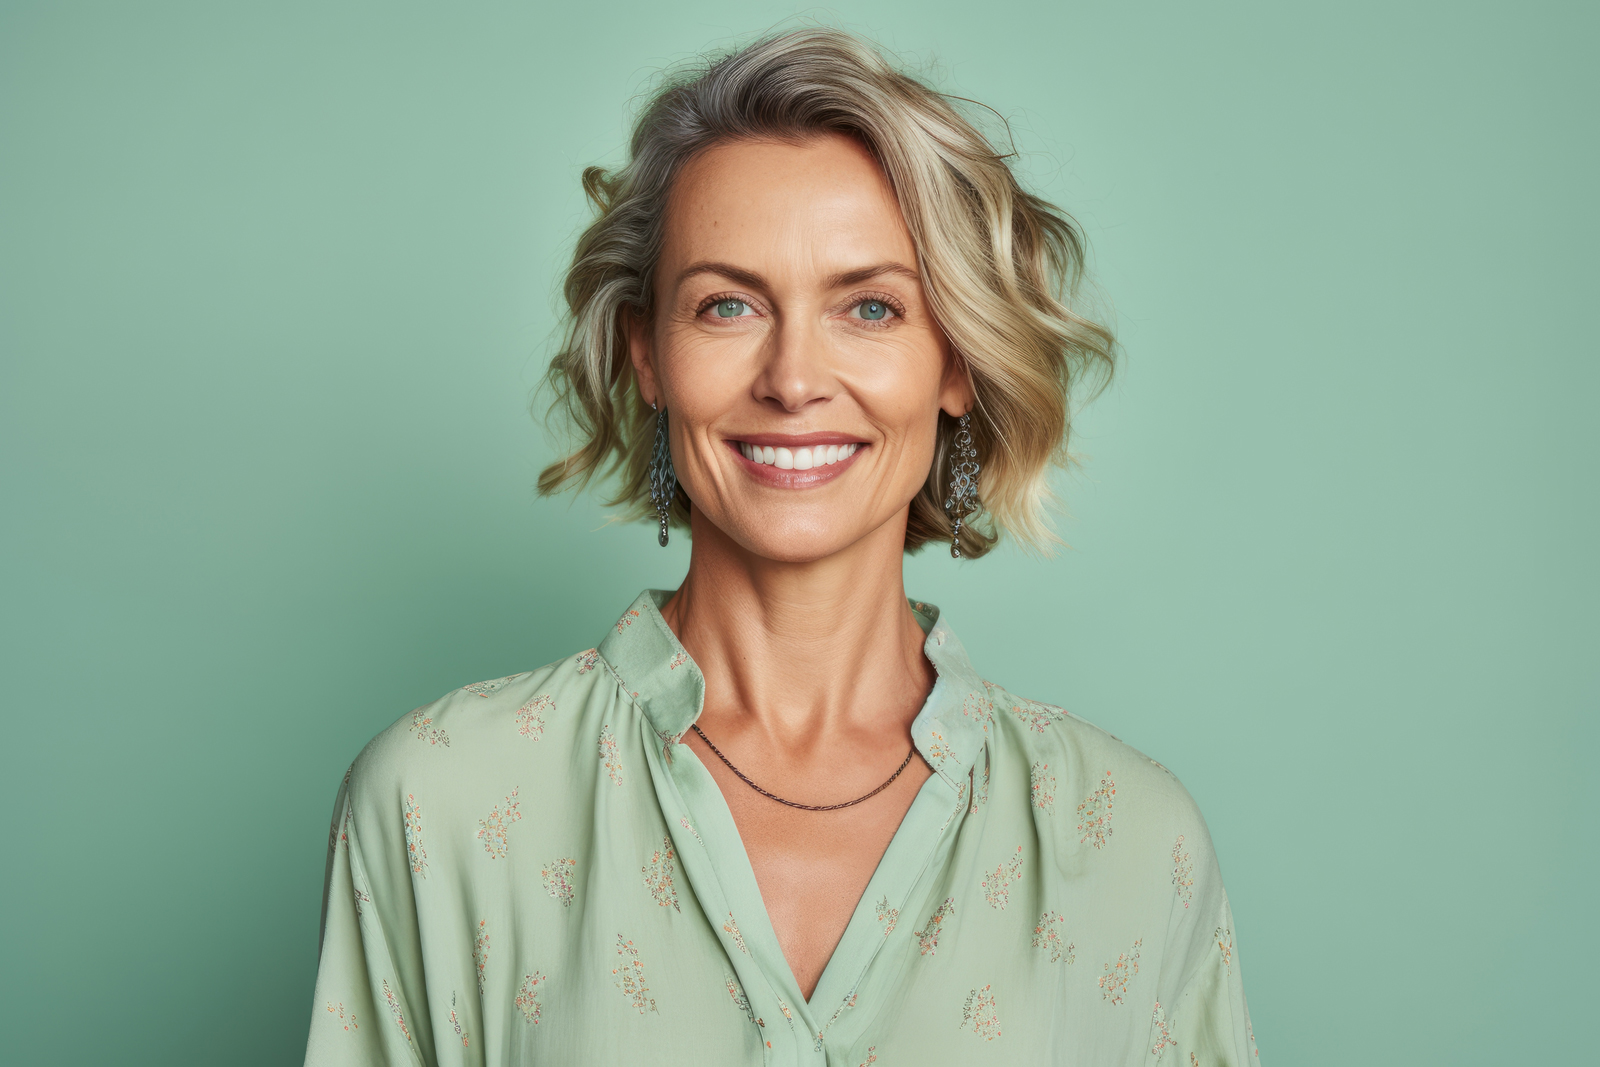 portrait of a middle-aged woman smiling at the camera emphasising the benefits of adding collagen to your diet for healthier skin, hair, and nails.